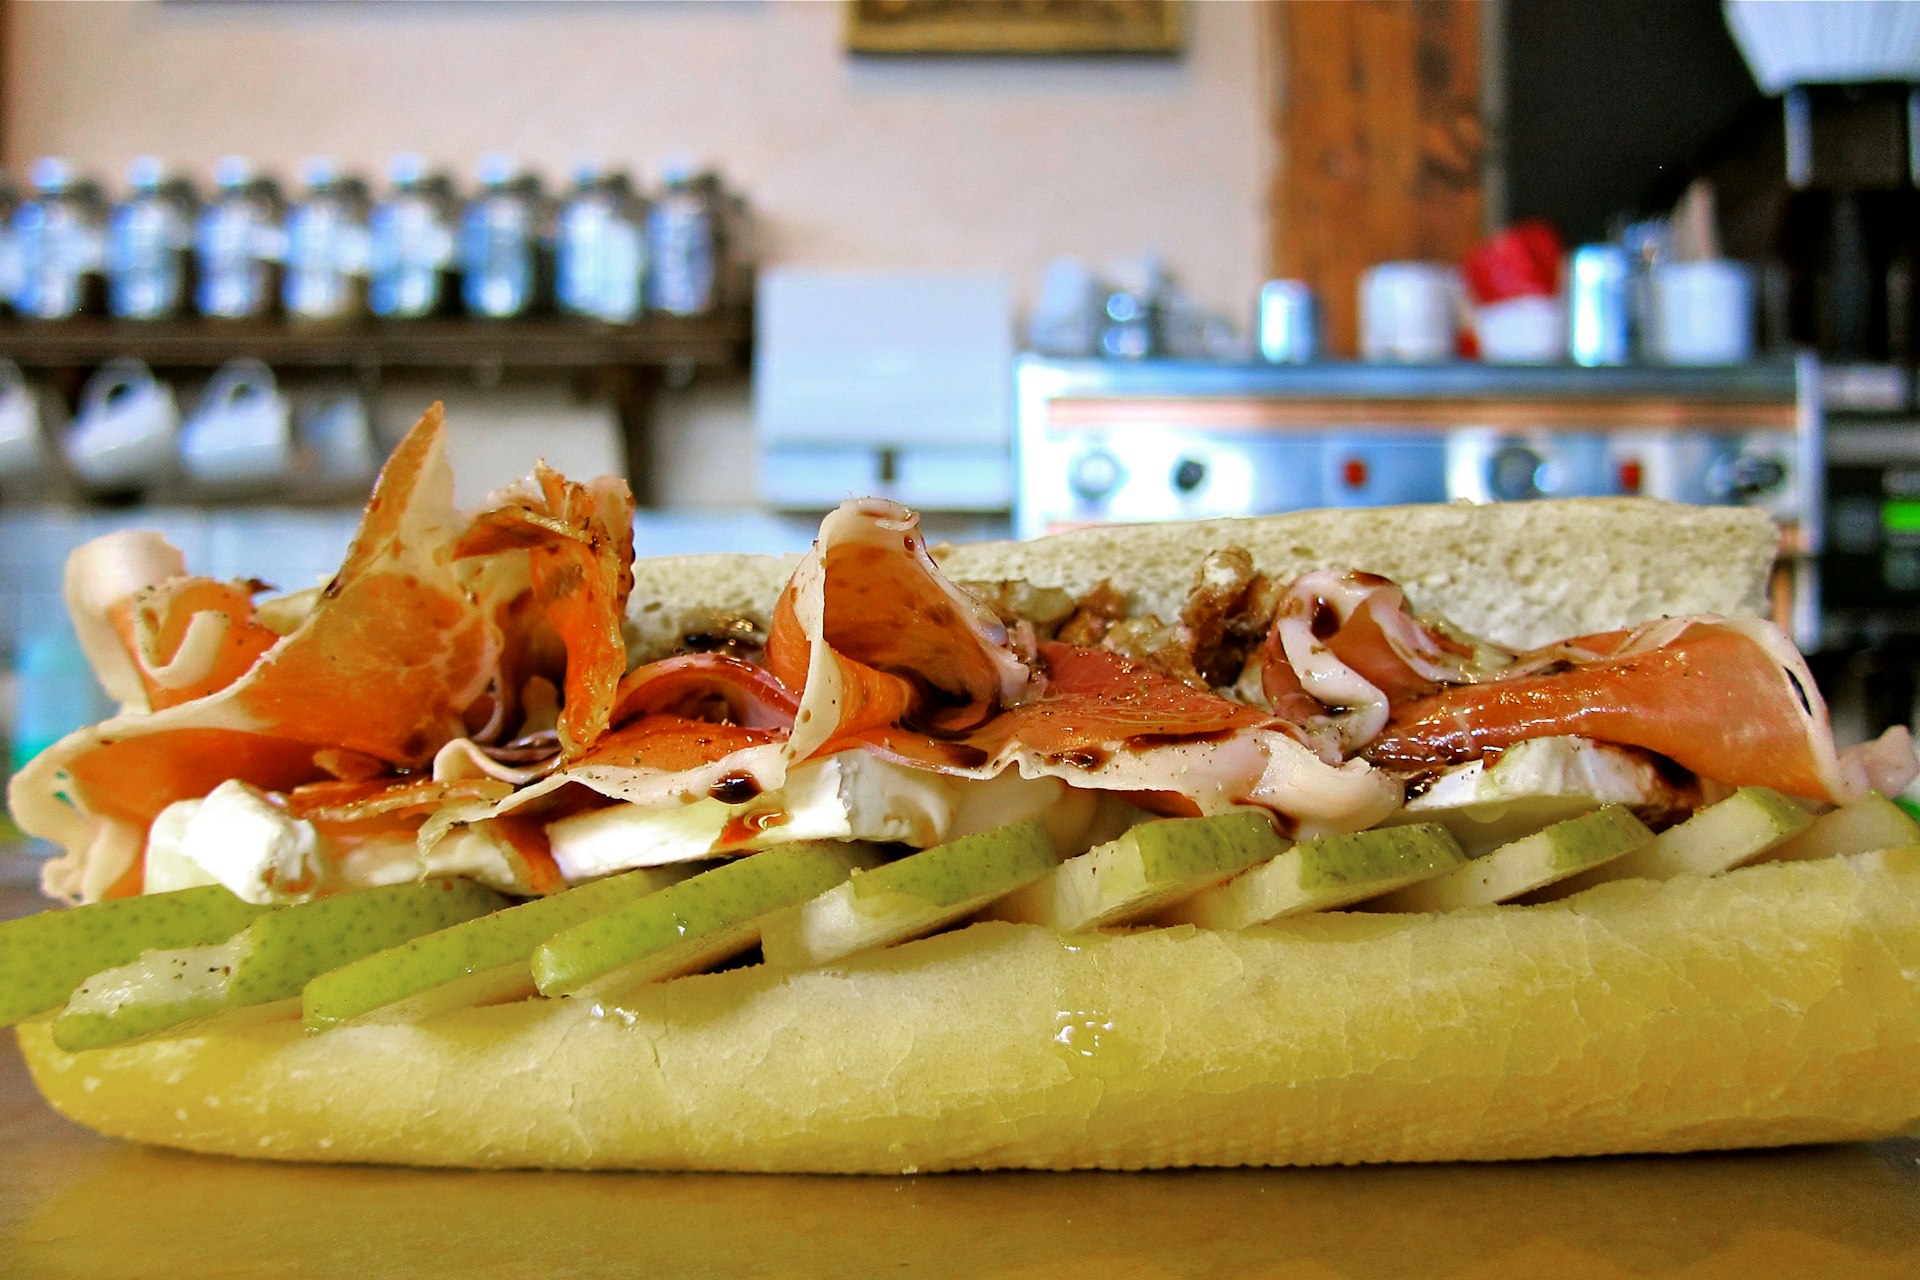 Fresh-made baguette sandwiches are a feature of Finch’s menu. Image by John Lee / Lonely Planet